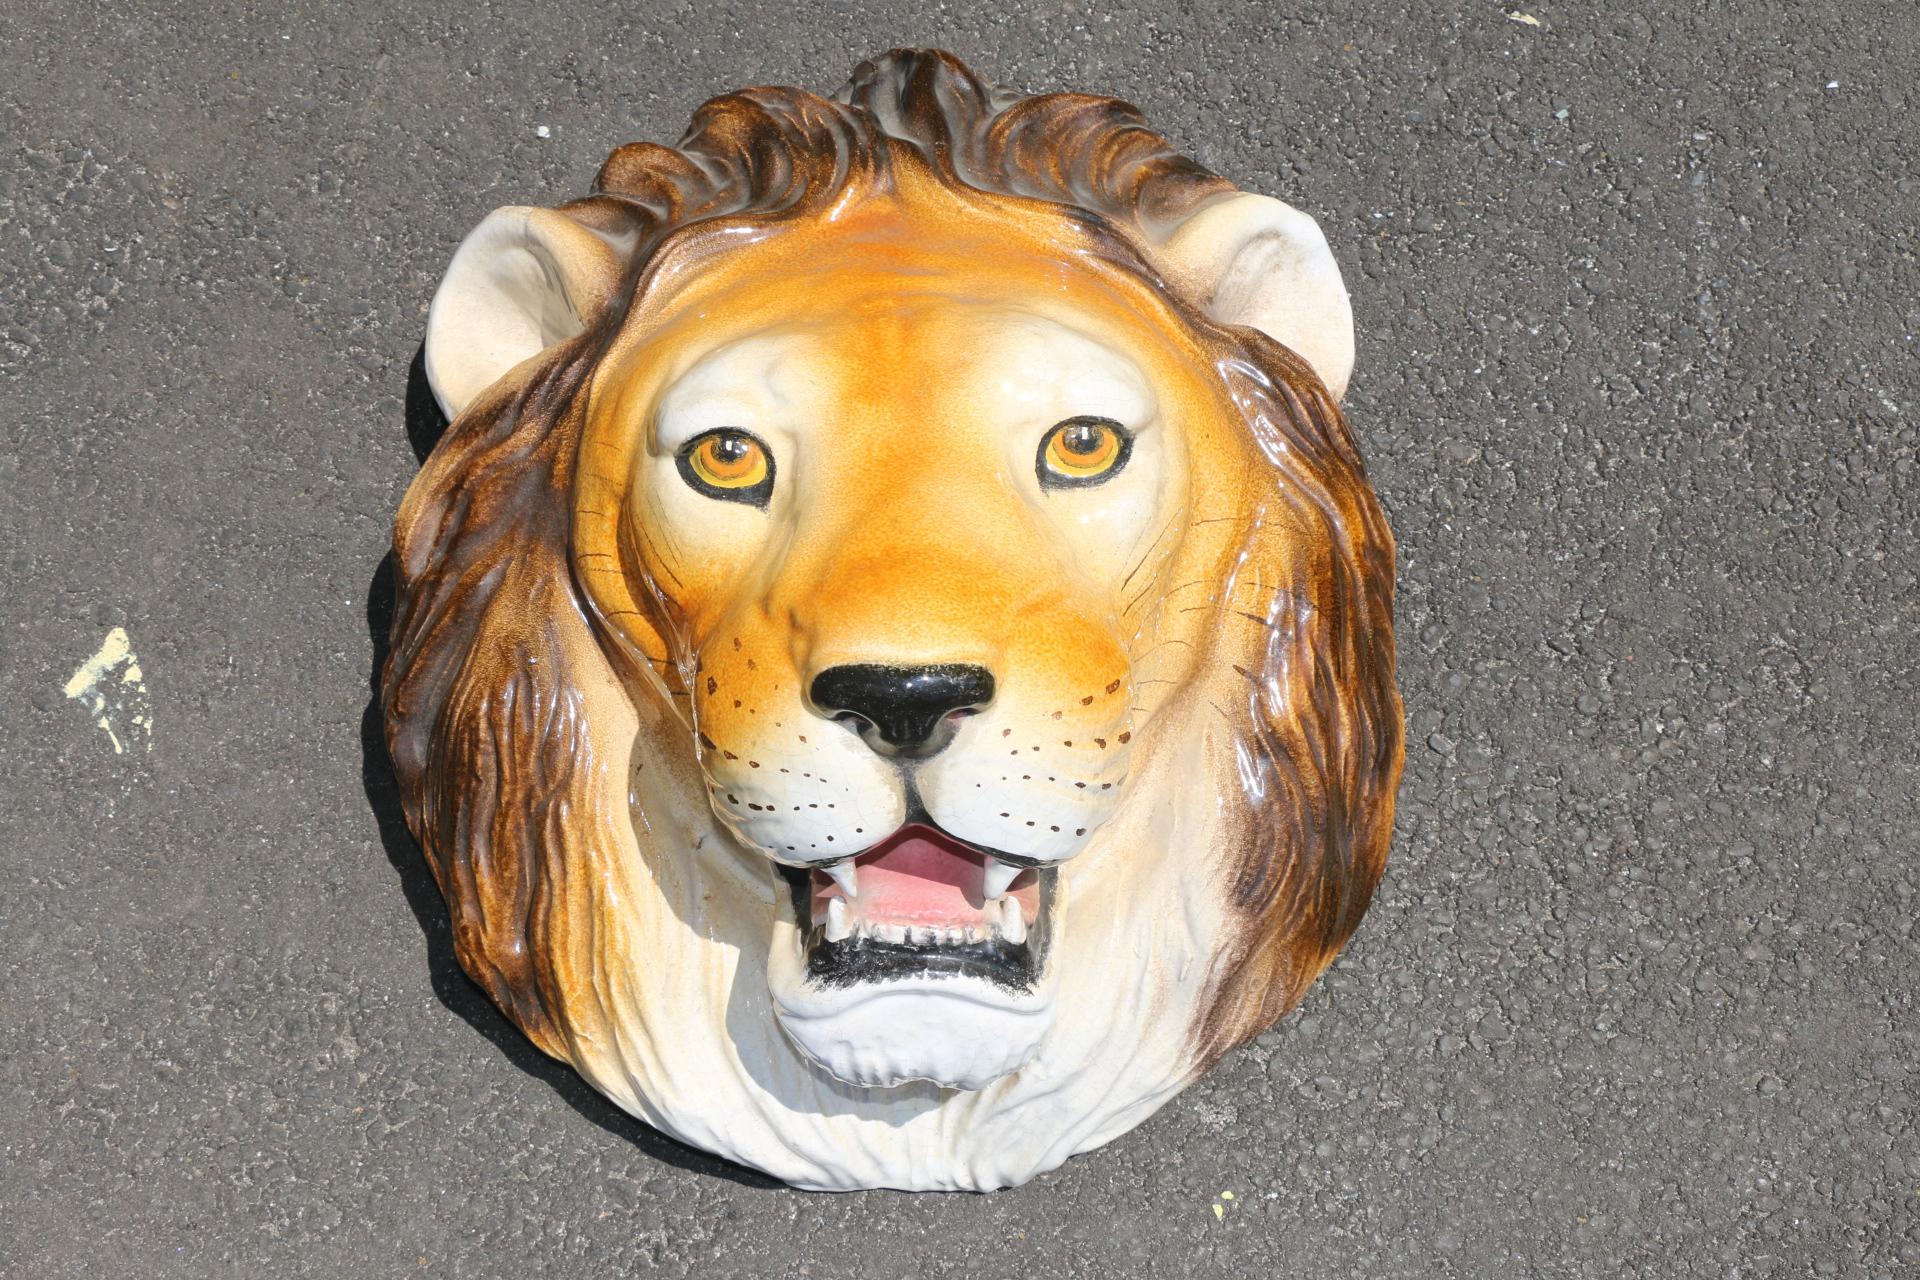 Vintage ceramic lion statue face. Very well kept and made. No chips or cracks. Great accent piece for any home.